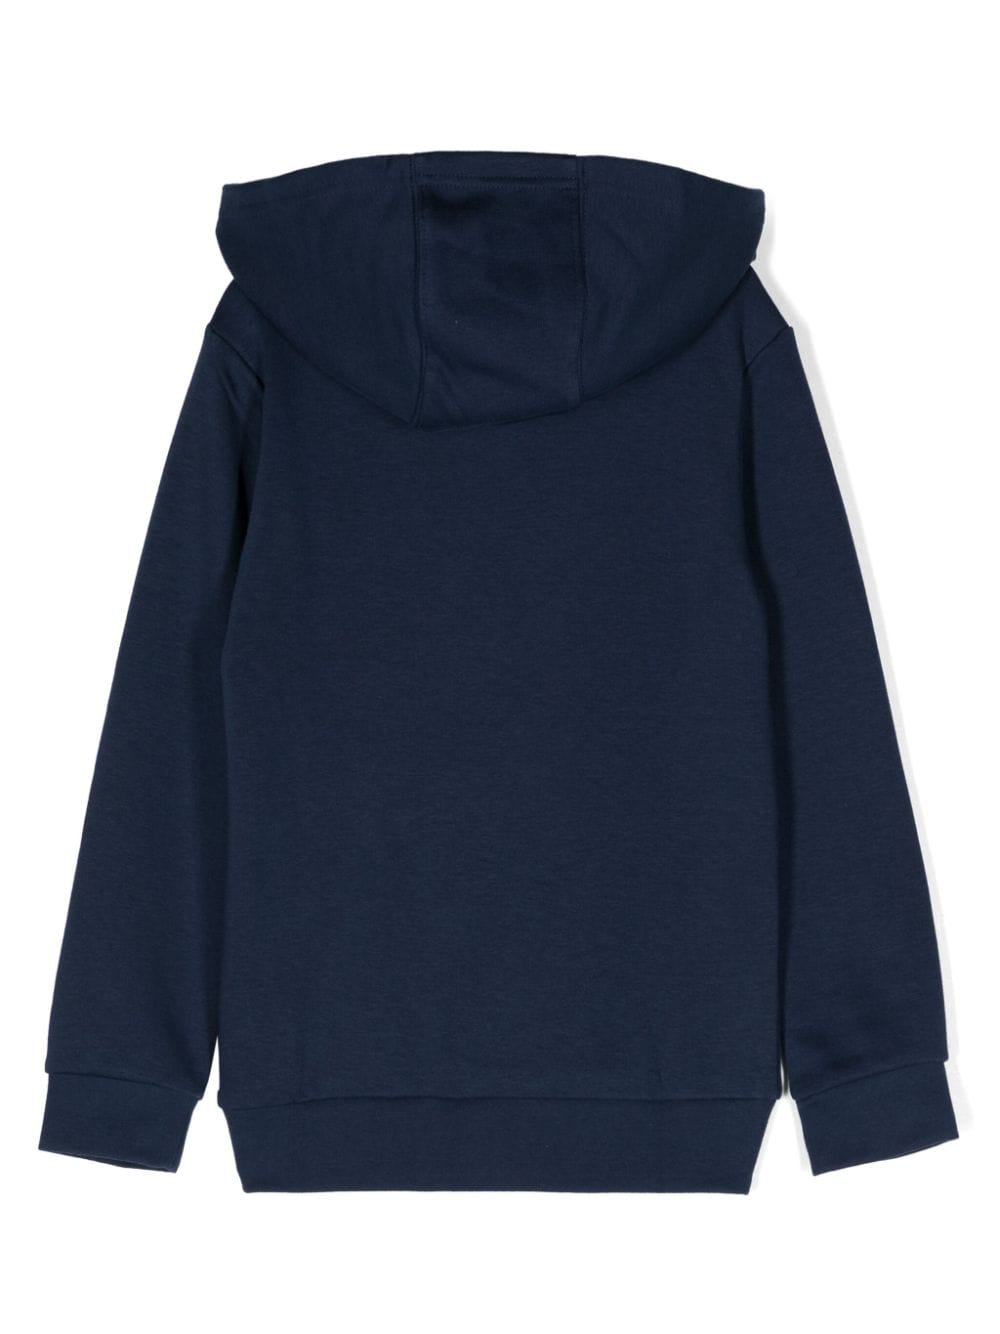 Image 2 of adidas Kids logo-embroidered cotton blend hoodie